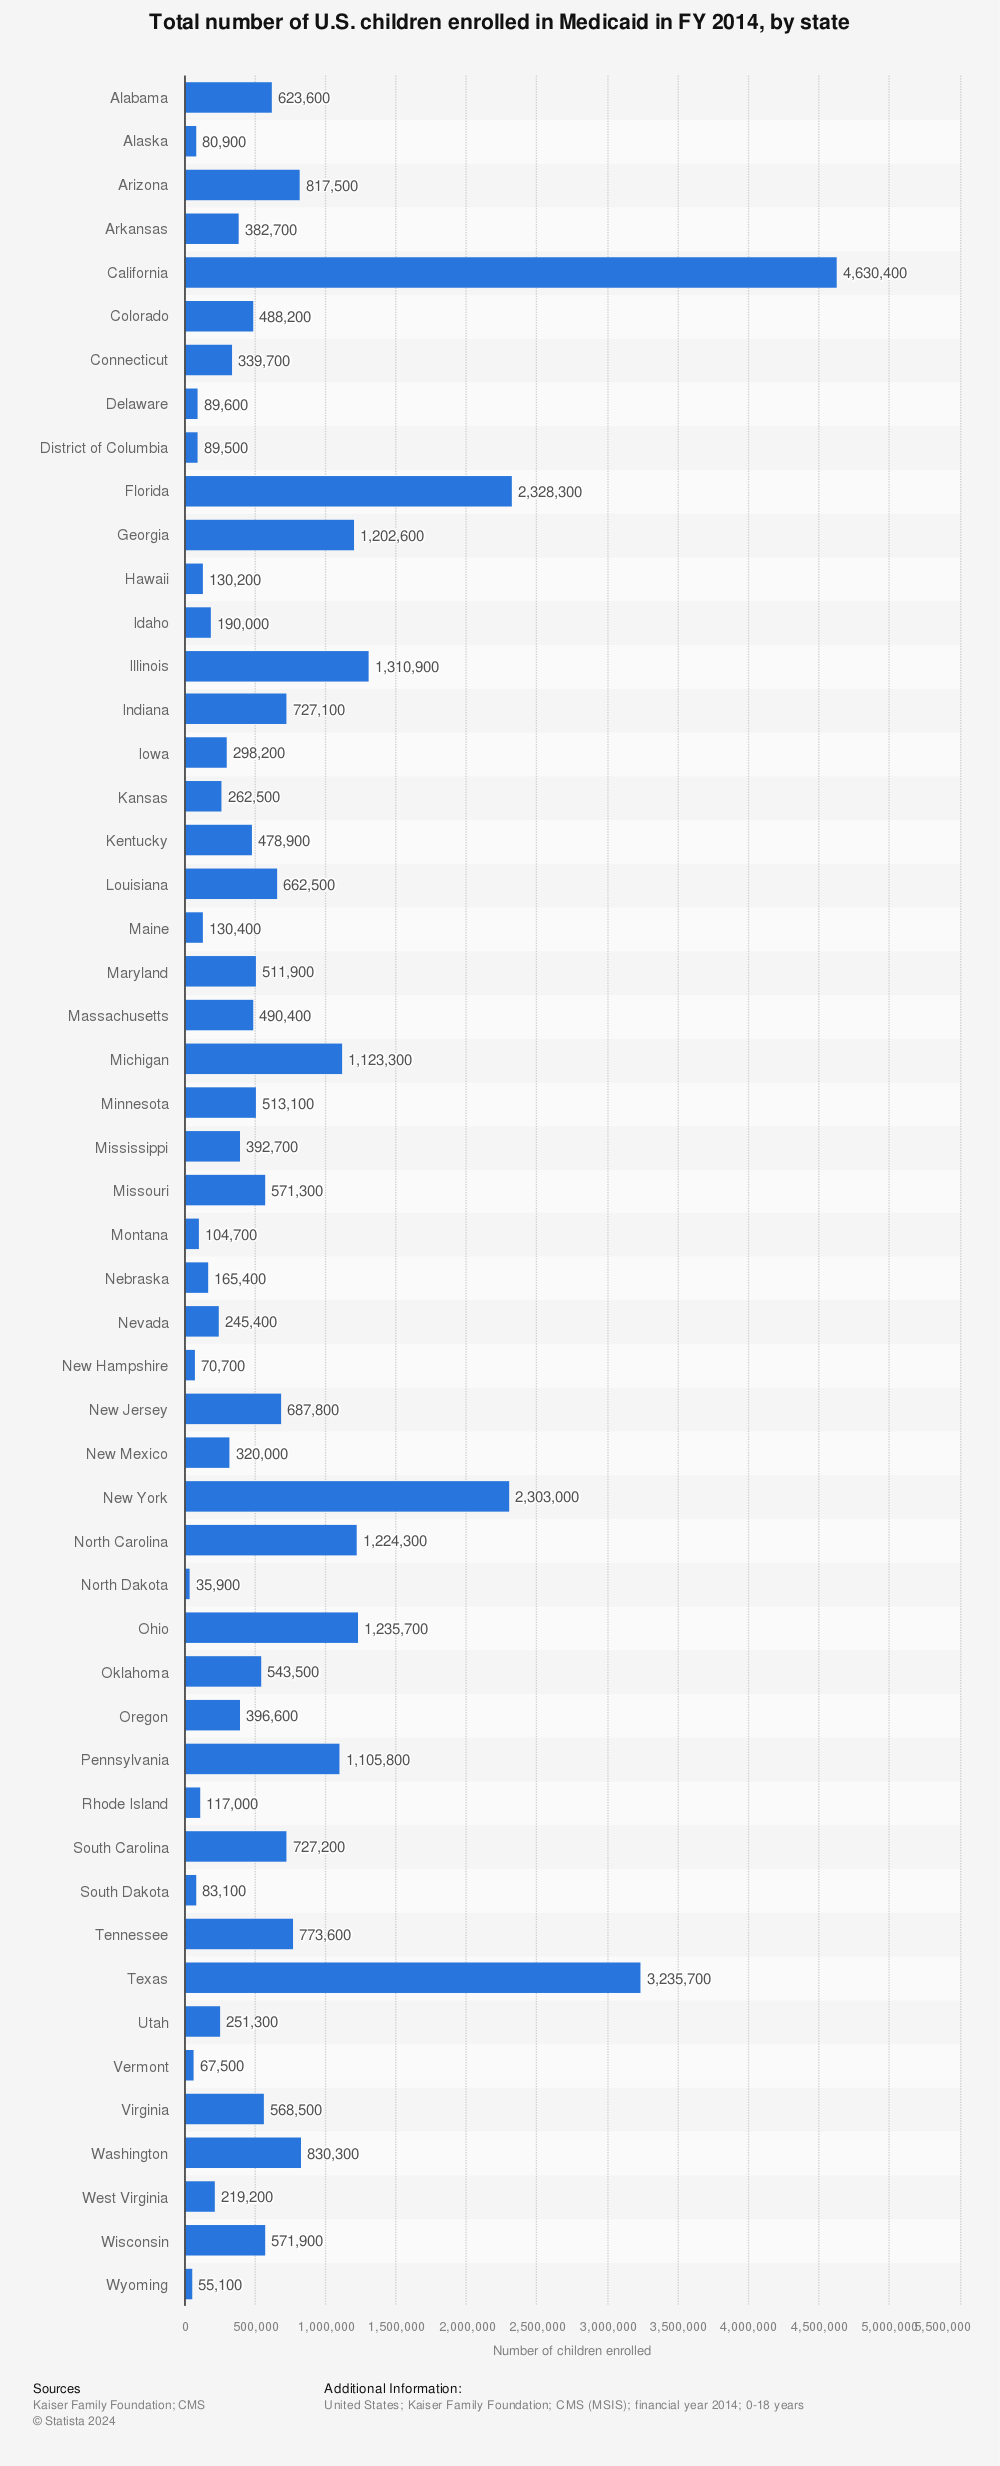 Statistic: Total number of U.S. children enrolled in Medicaid in FY 2014, by state | Statista